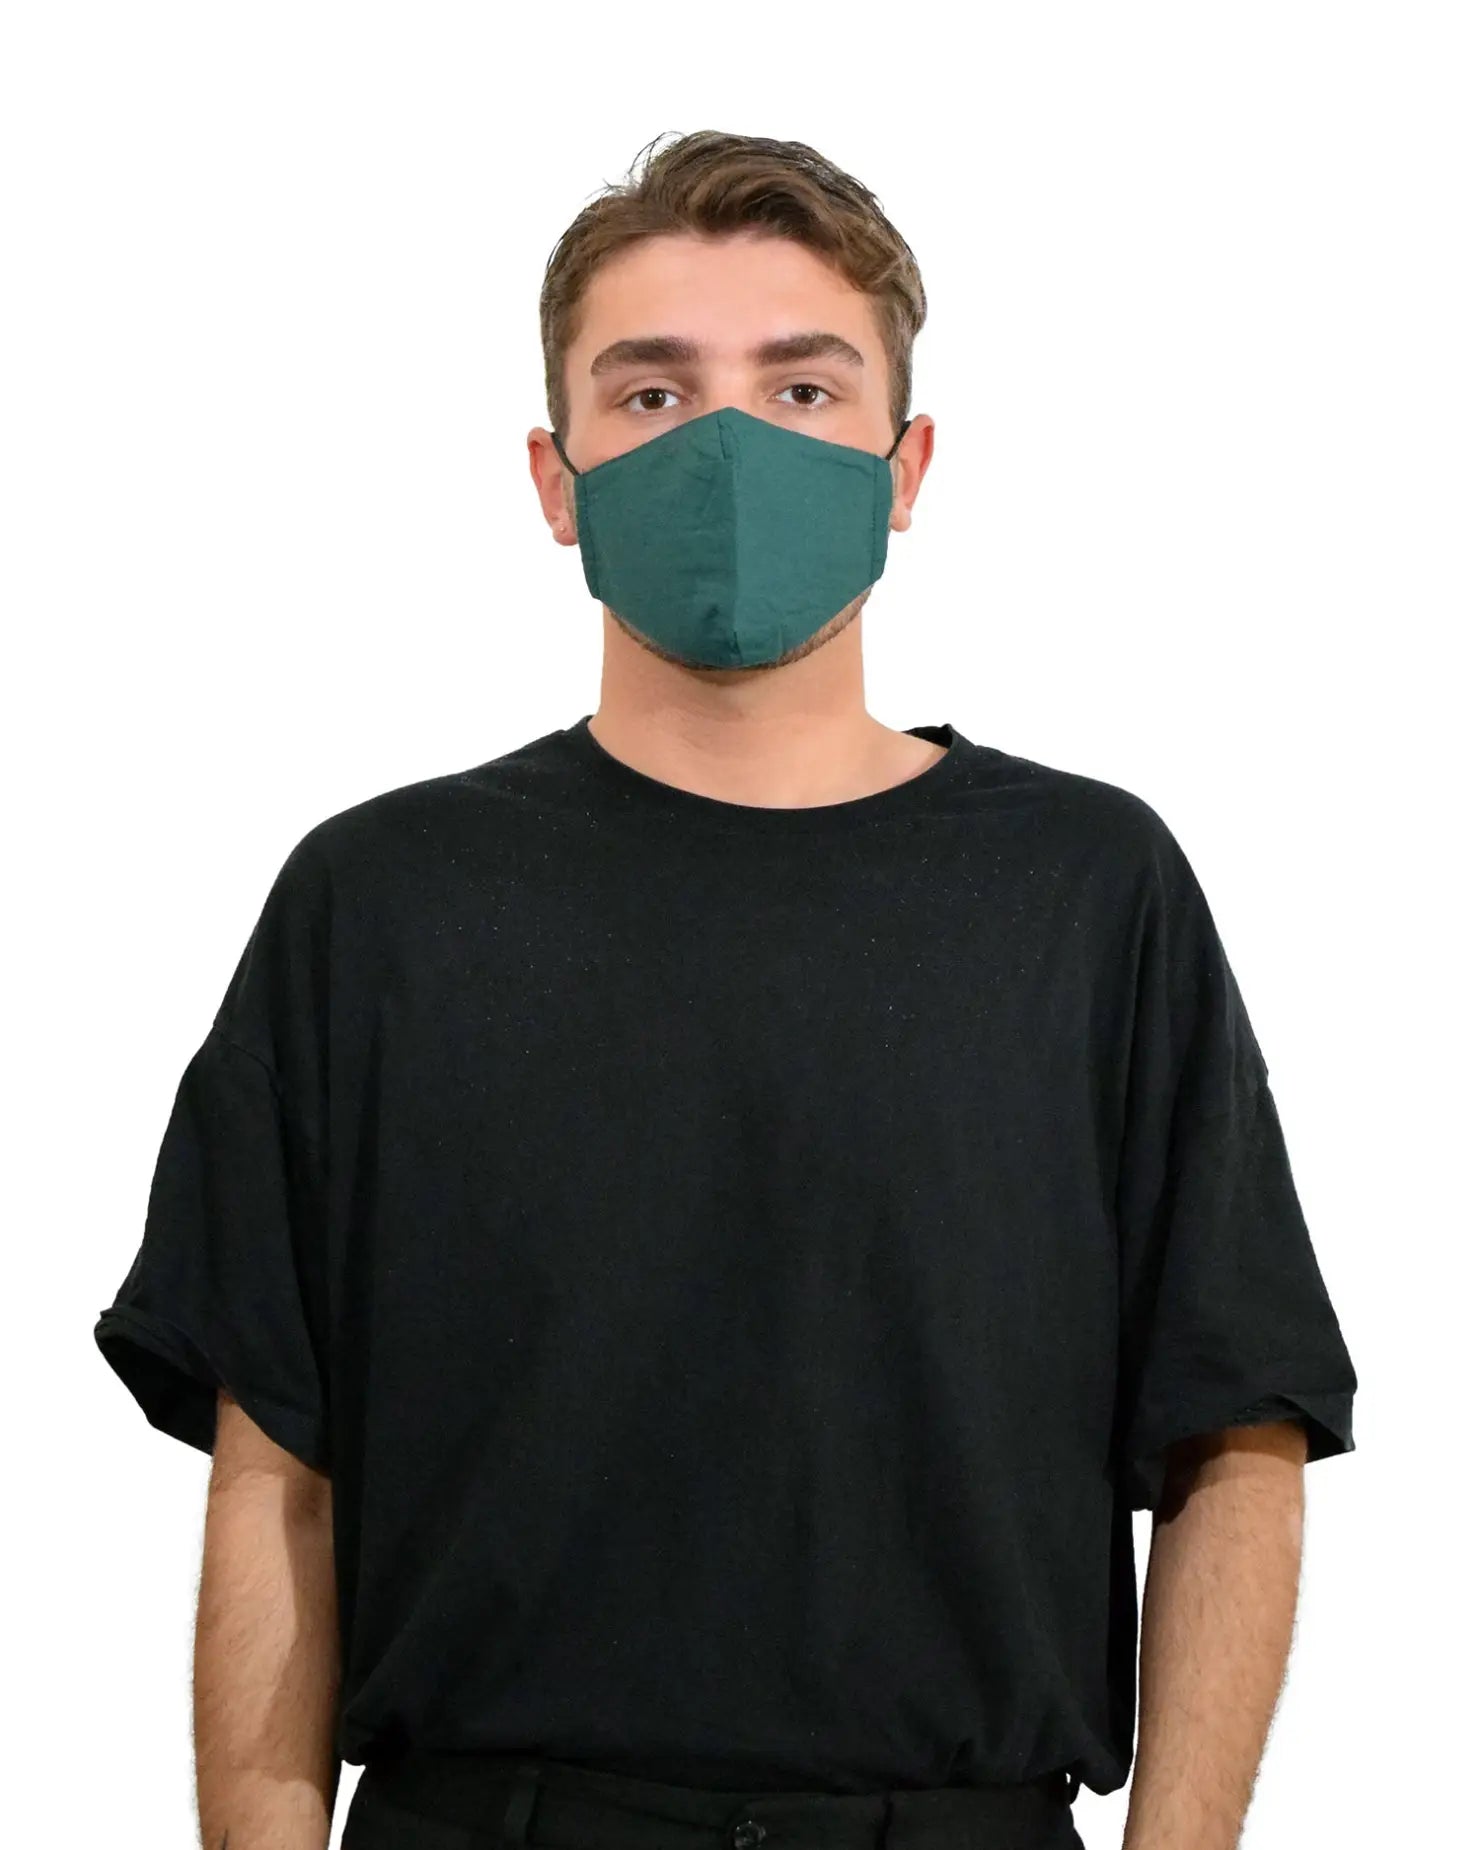 Man wearing cotton fashion face mask from 3D Design 100% Cotton Fashion Face Mask Covering.